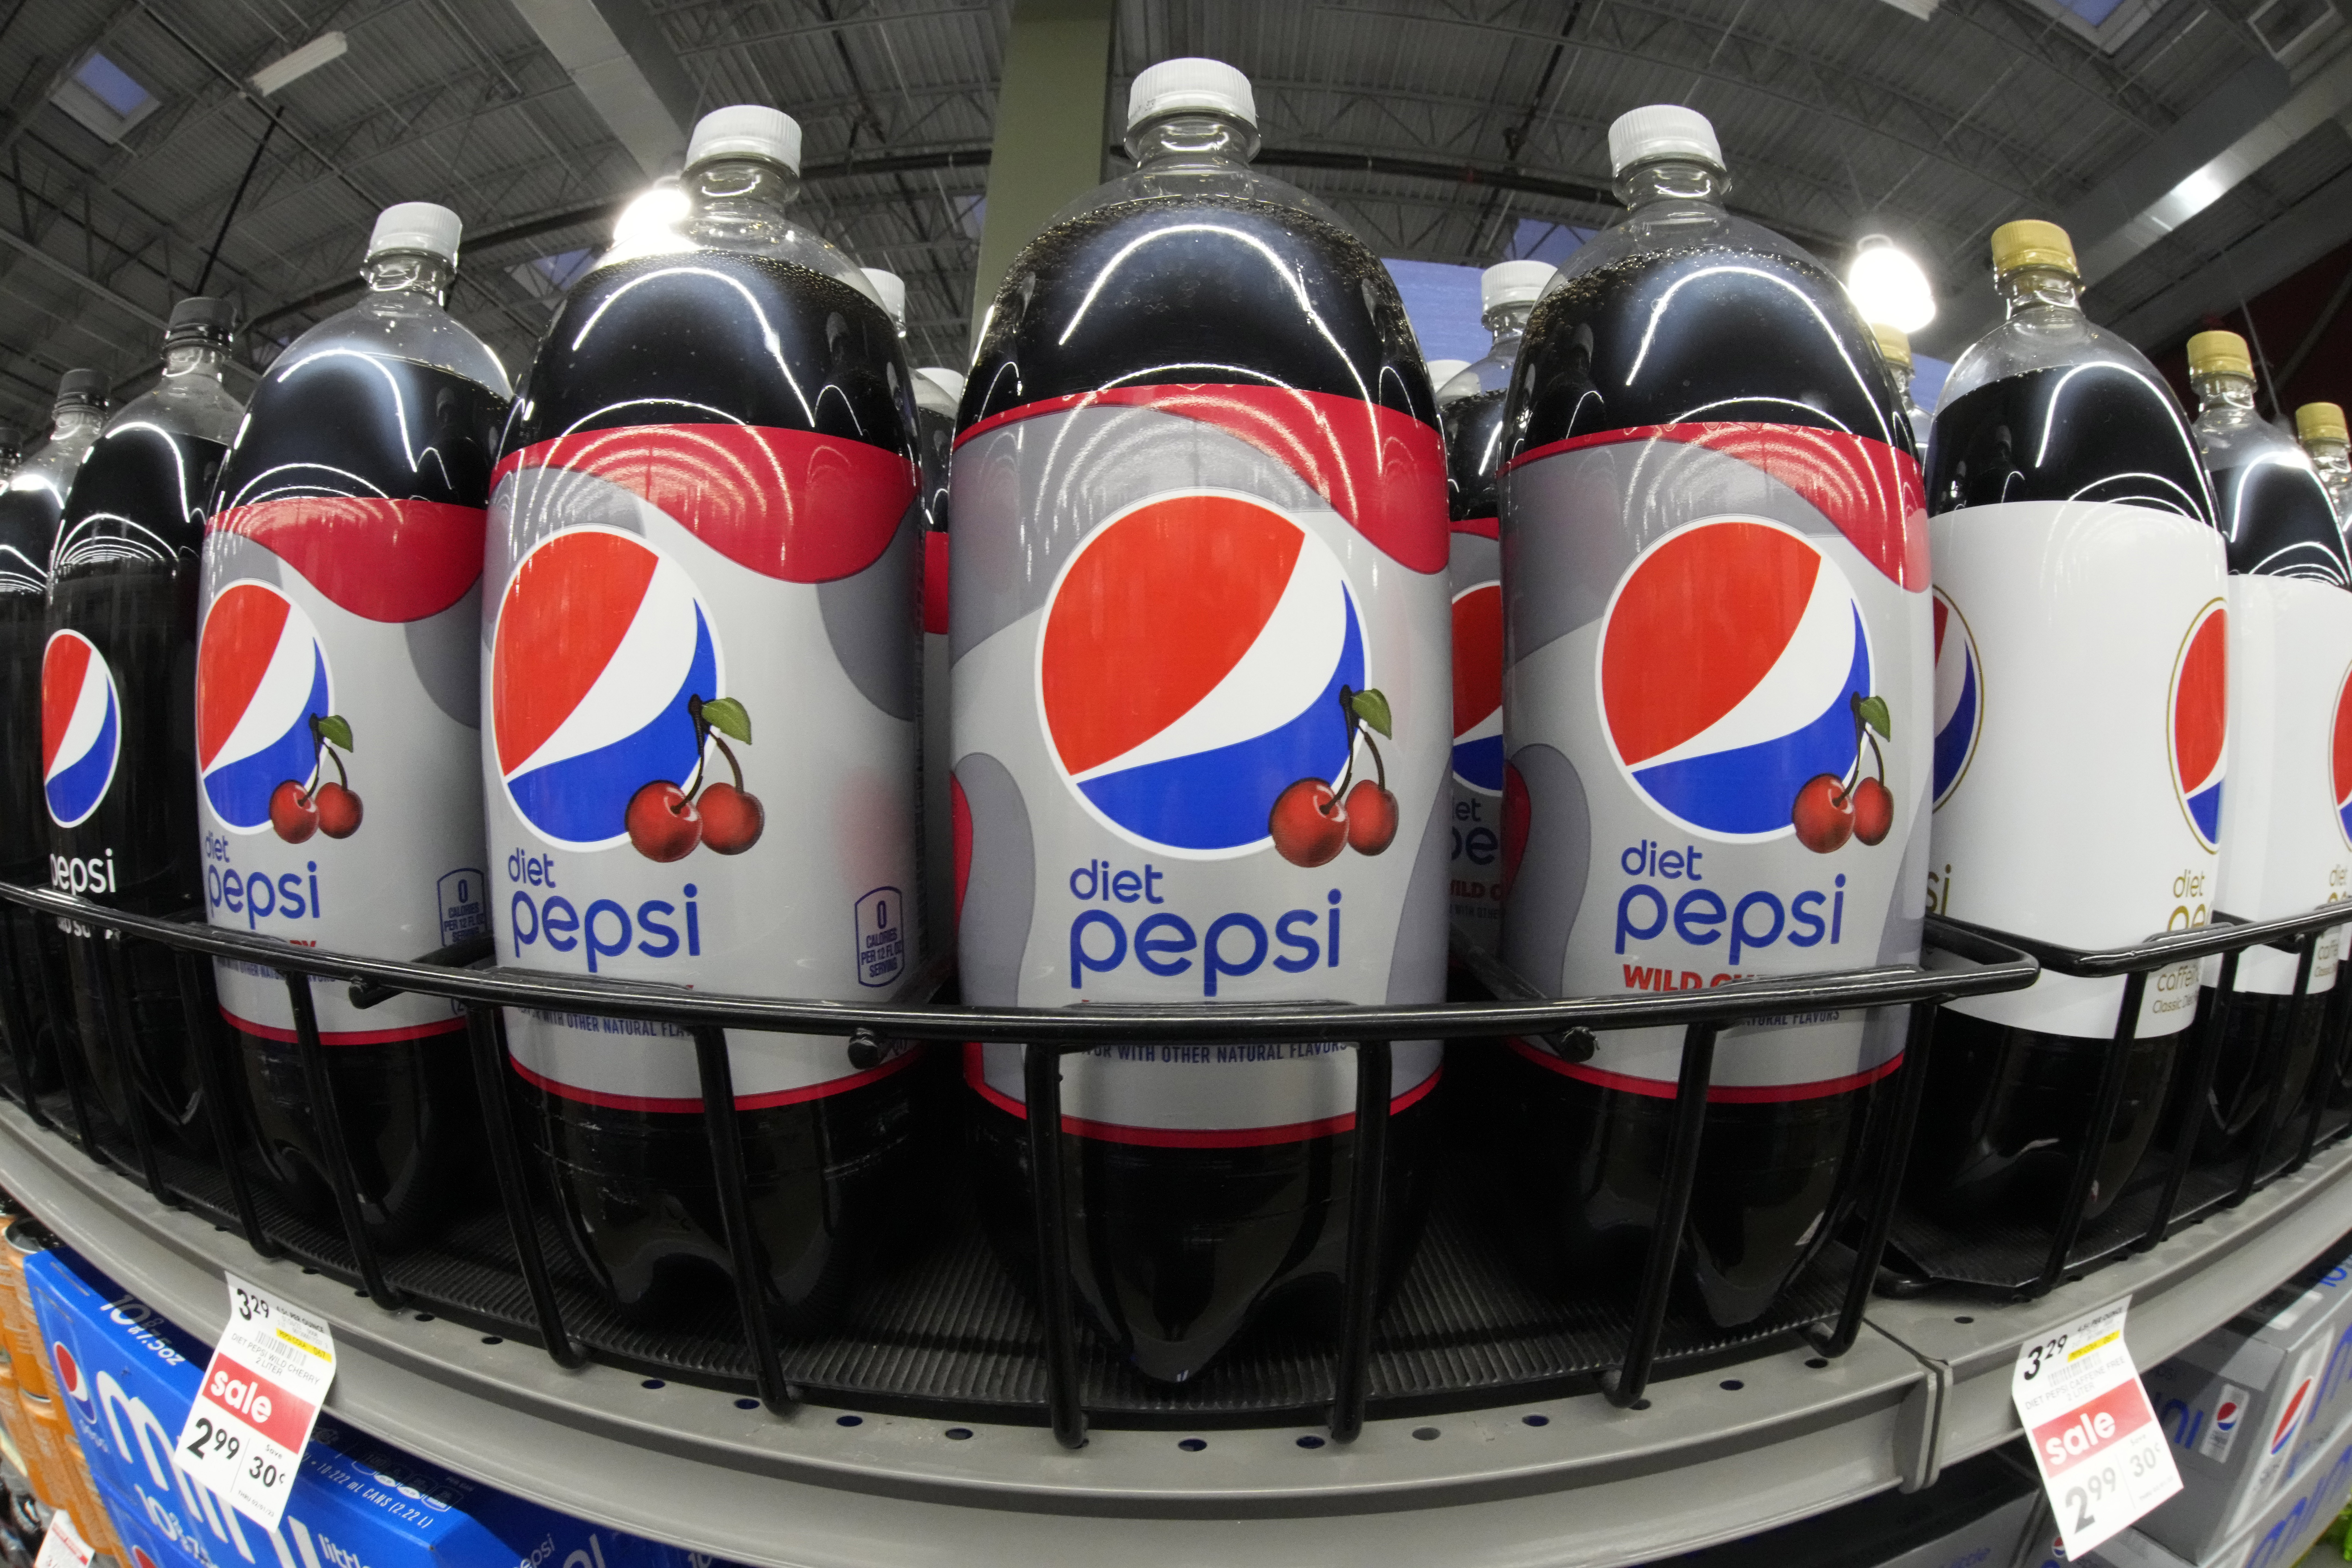 PepsiCo hikes prices by double digits for the 7th consecutive